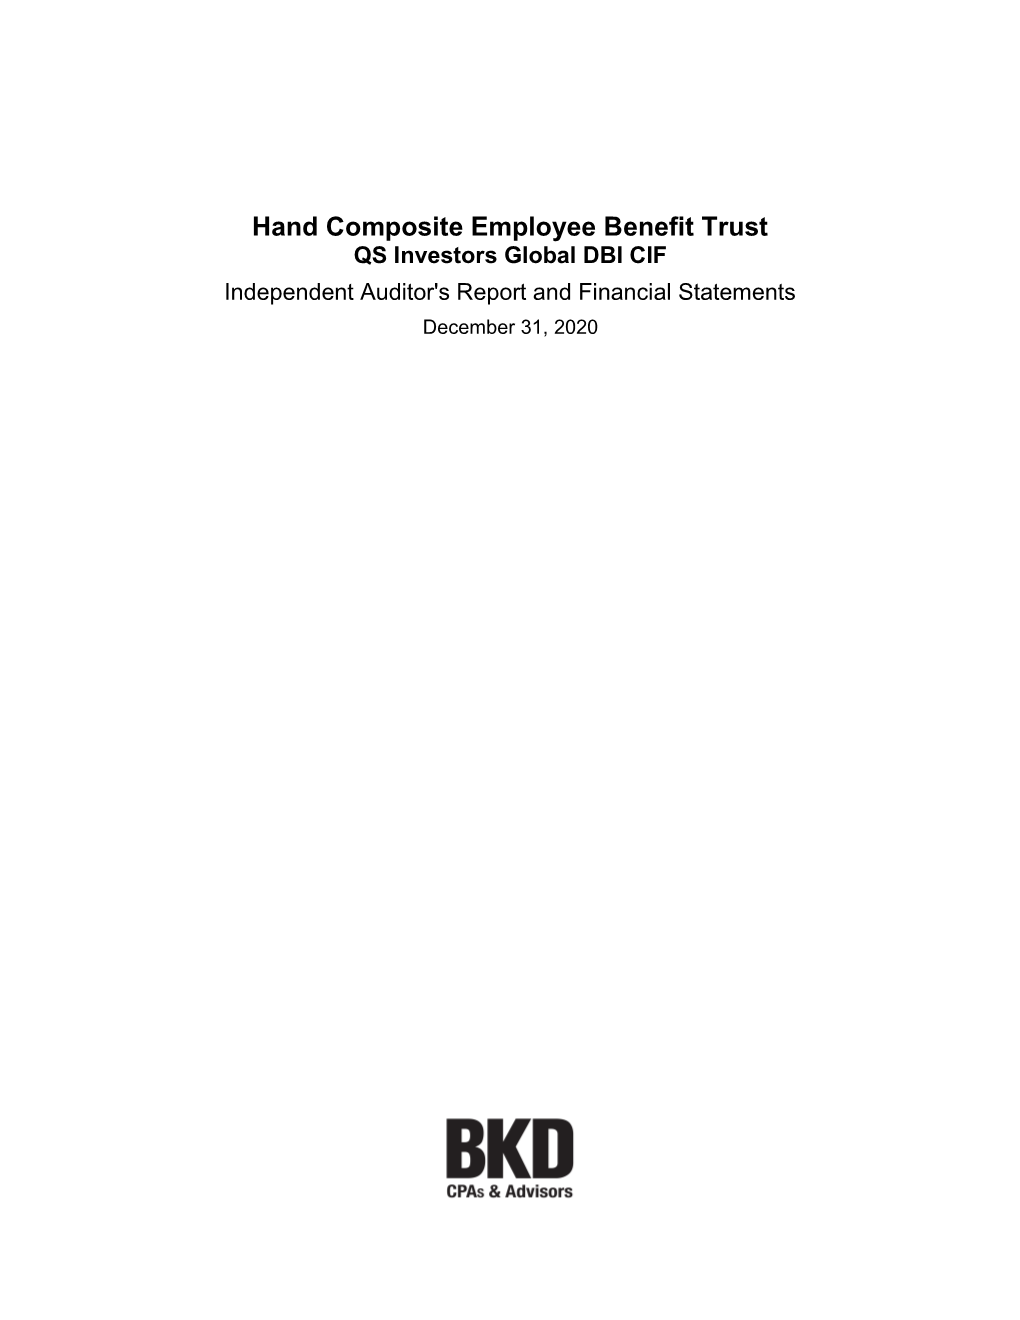 Hand Composite Employee Benefit Trust QS Investors Global DBI CIF Independent Auditor's Report and Financial Statements December 31, 2020